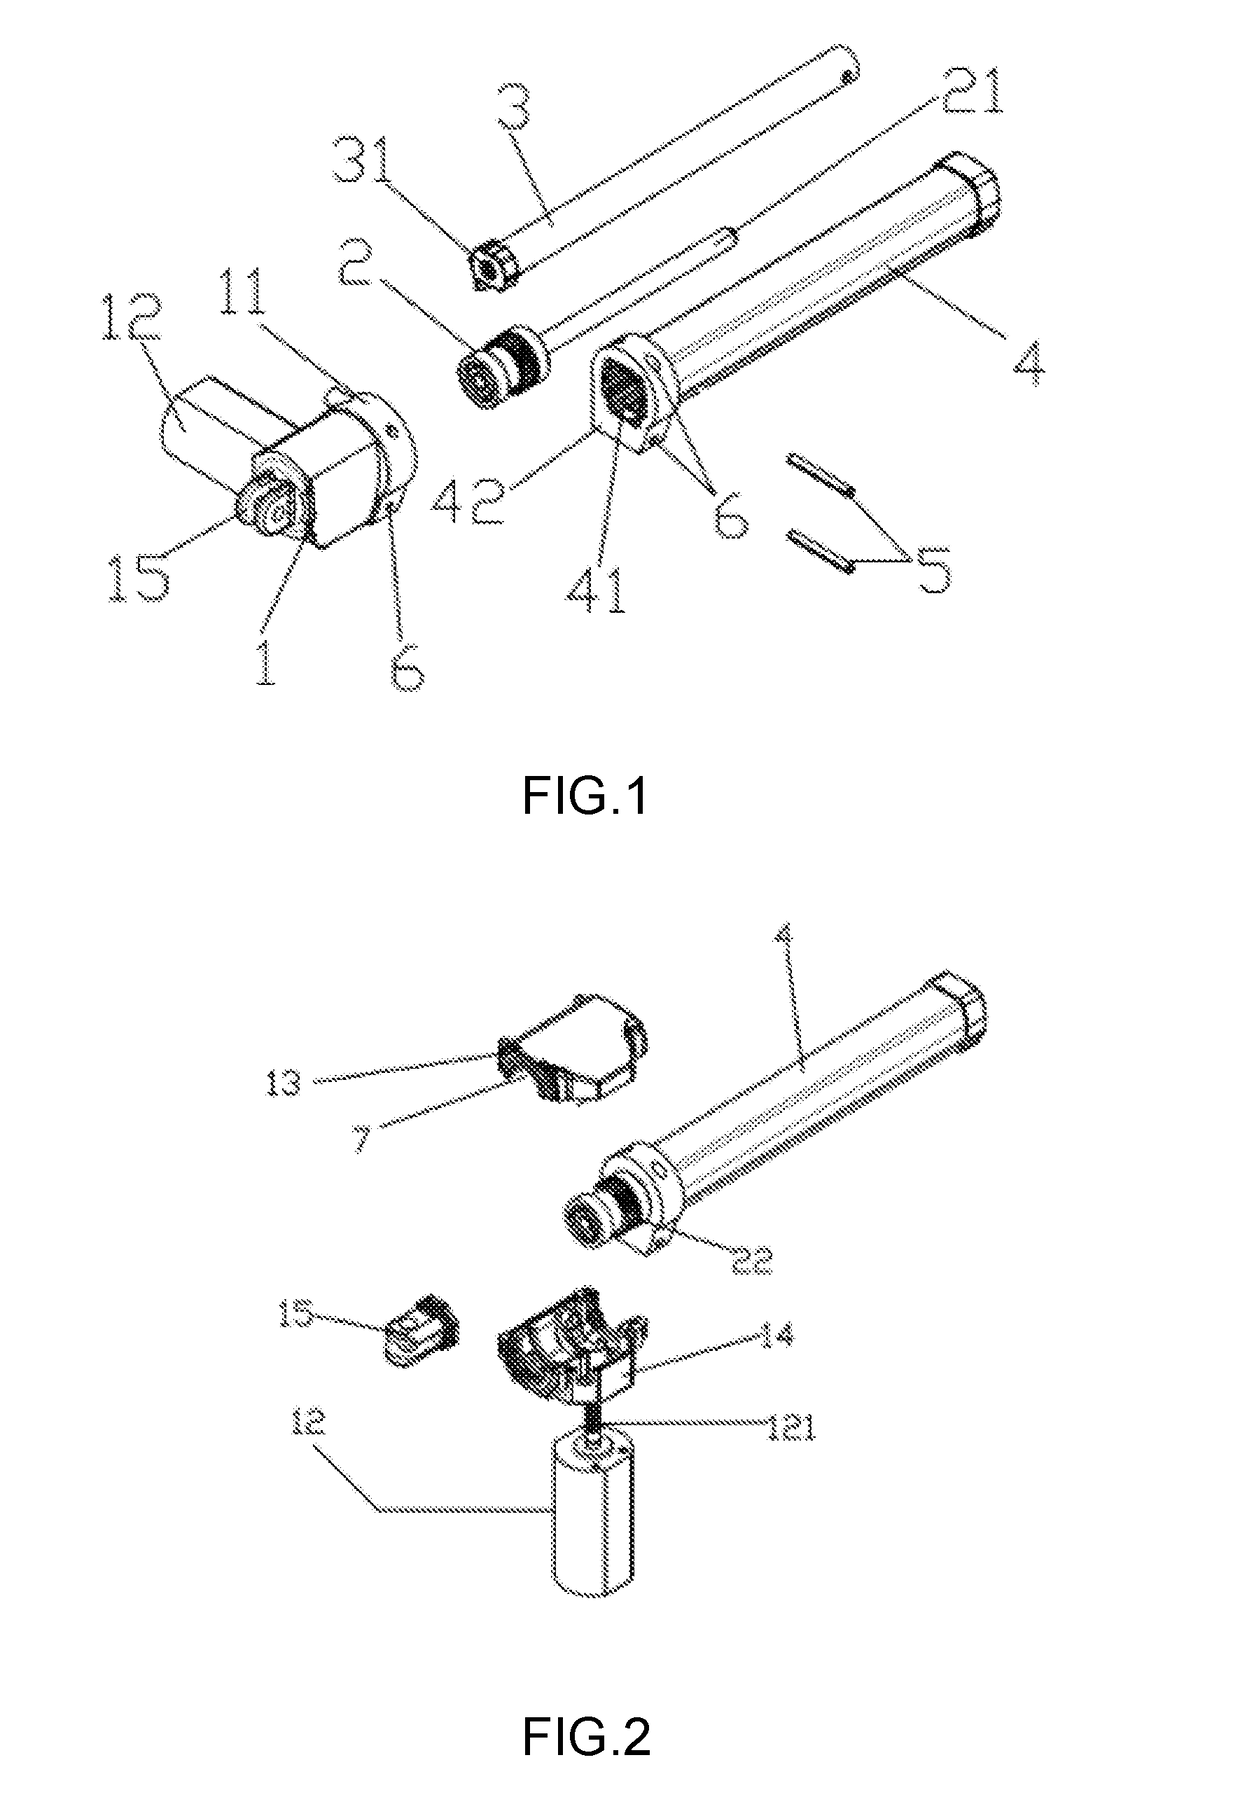 Modular electric linear actuator facilitating assembly and disassembly